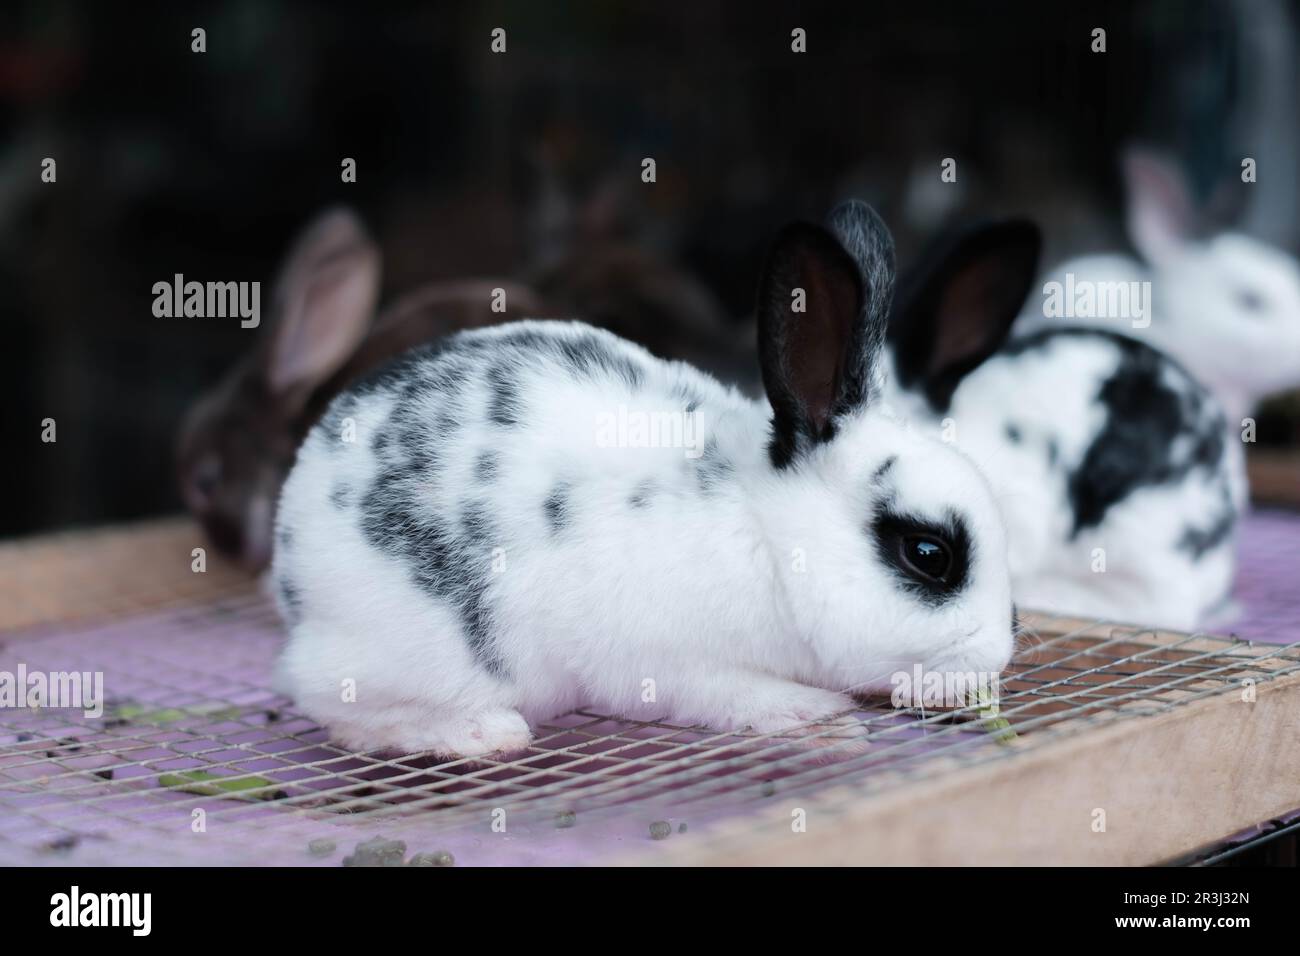 An English Spot rabbit breed placed on the top of the cage with bokeh or blurred background Stock Photo